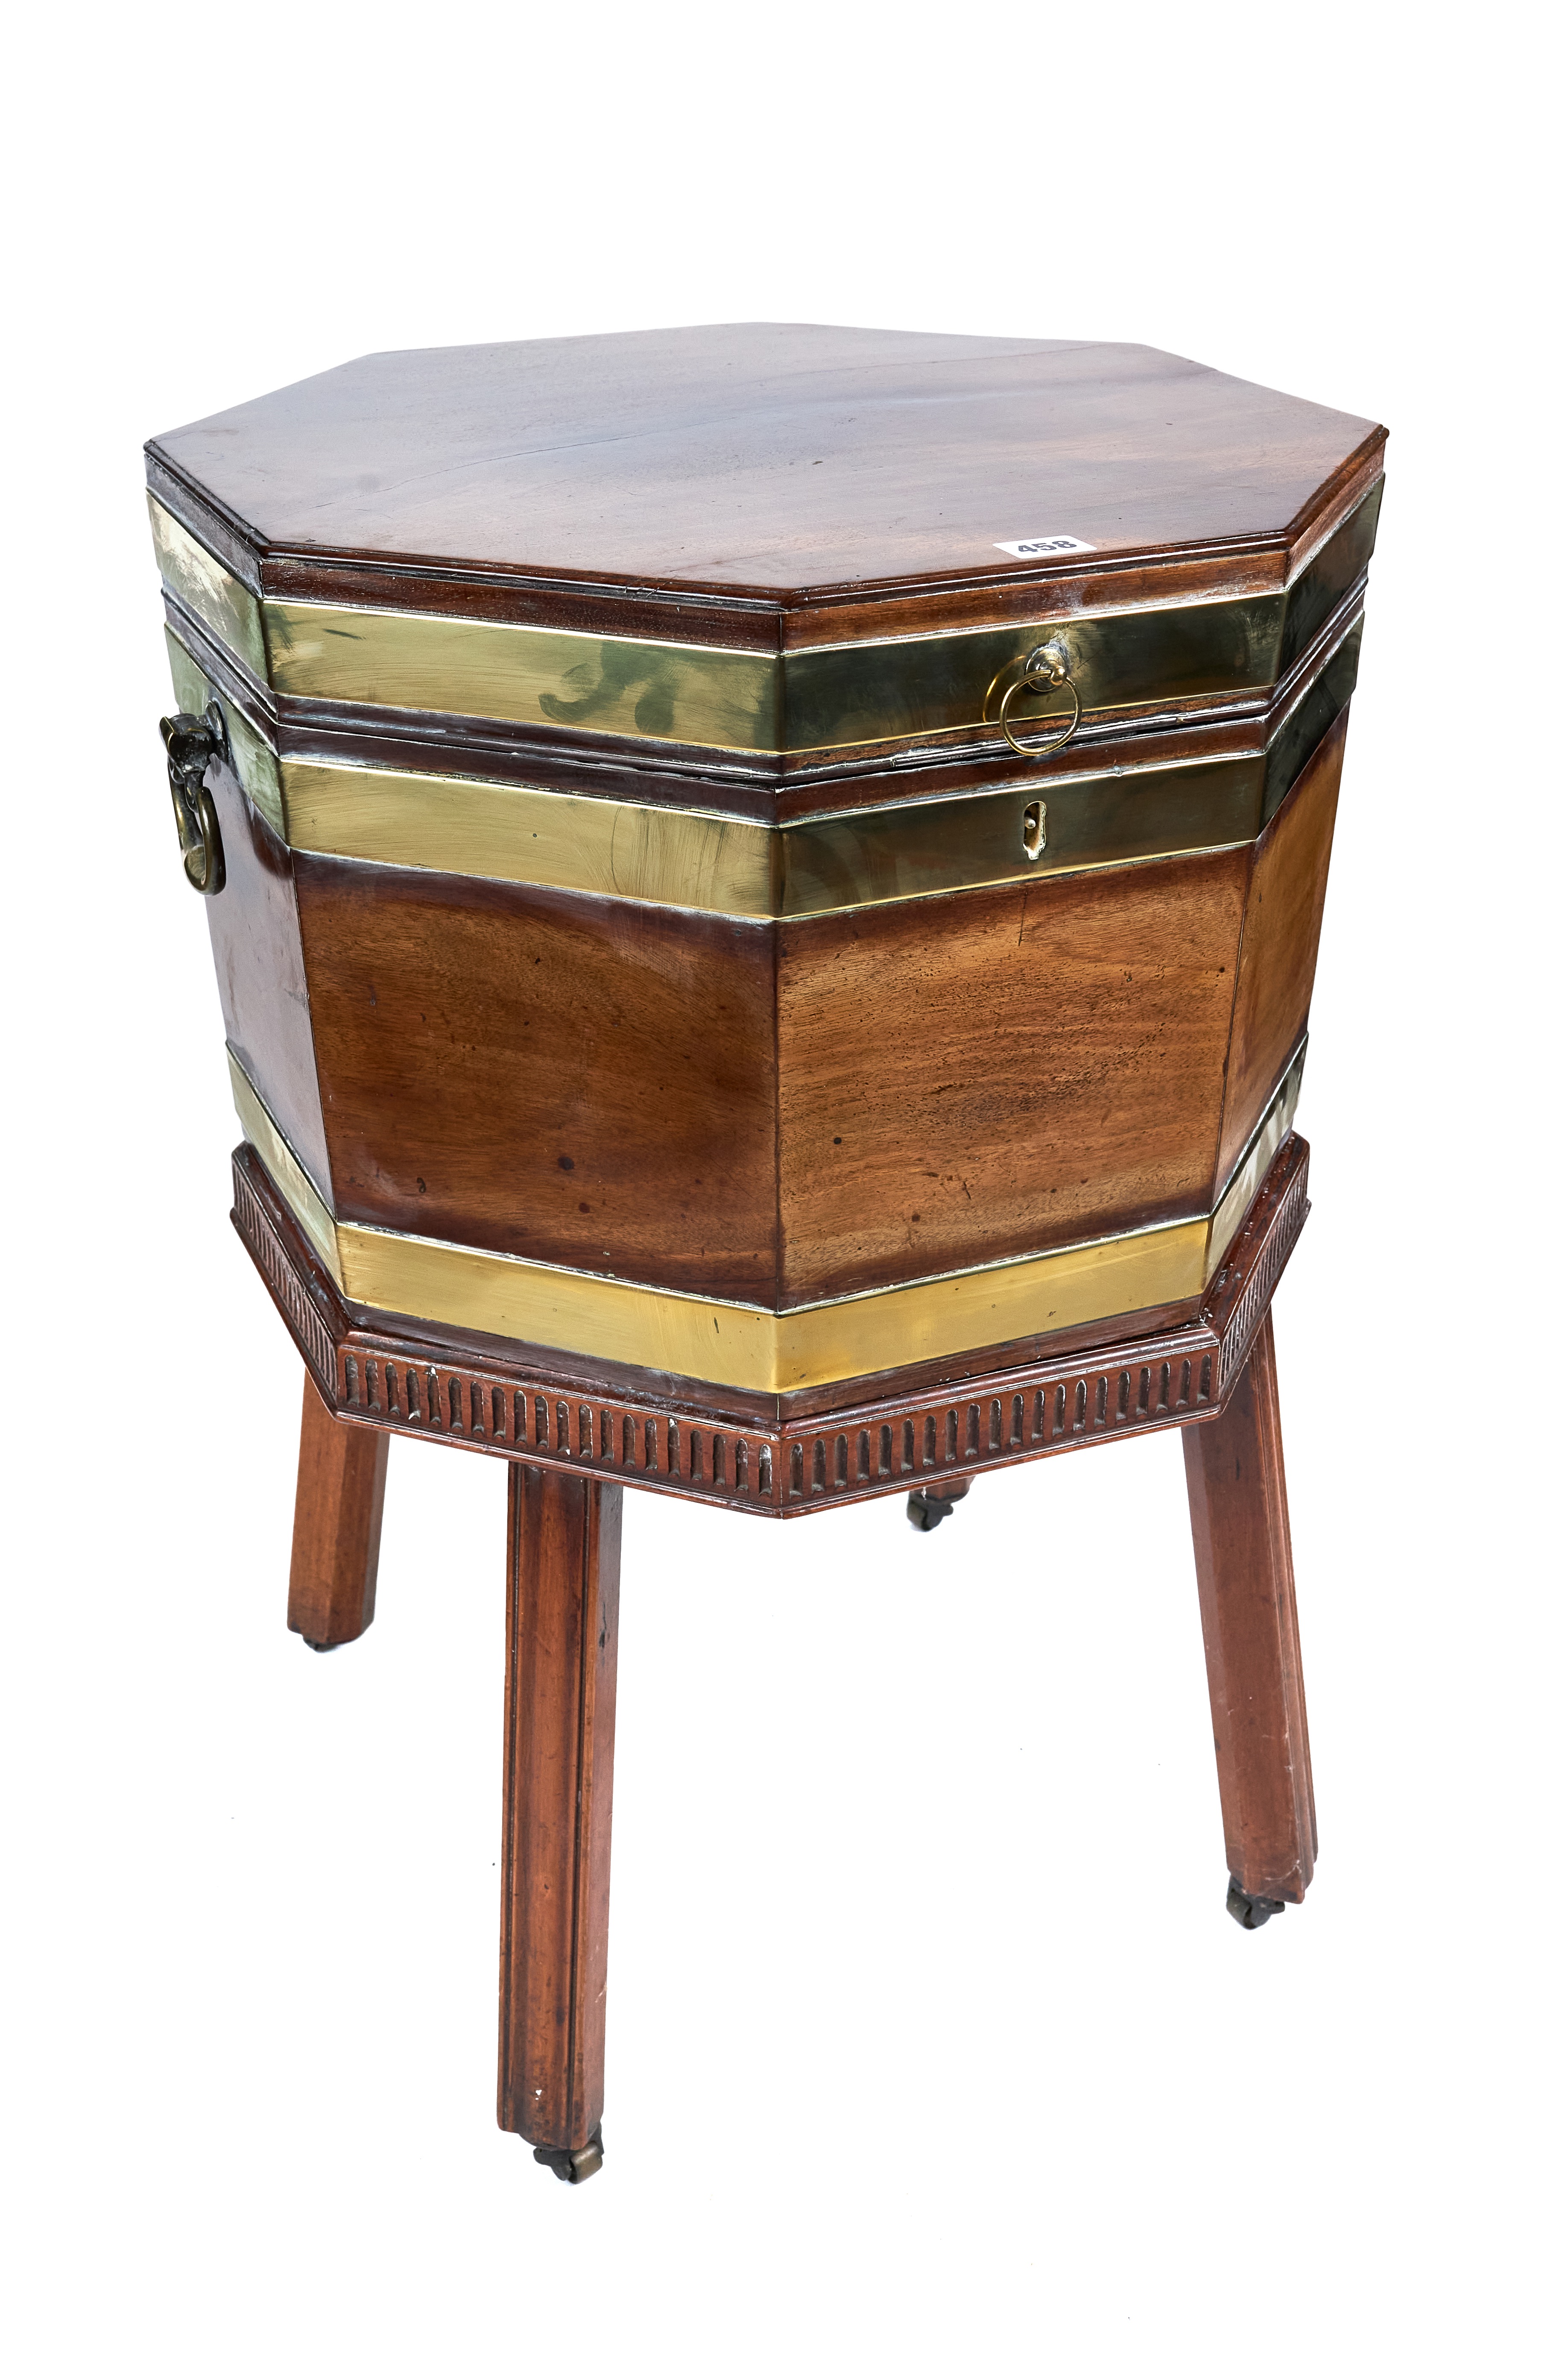 A GEORGE III MAHOGANY OCTAGONAL BRASS BOUND WINE COOLER raised on a detachable stand with moulded